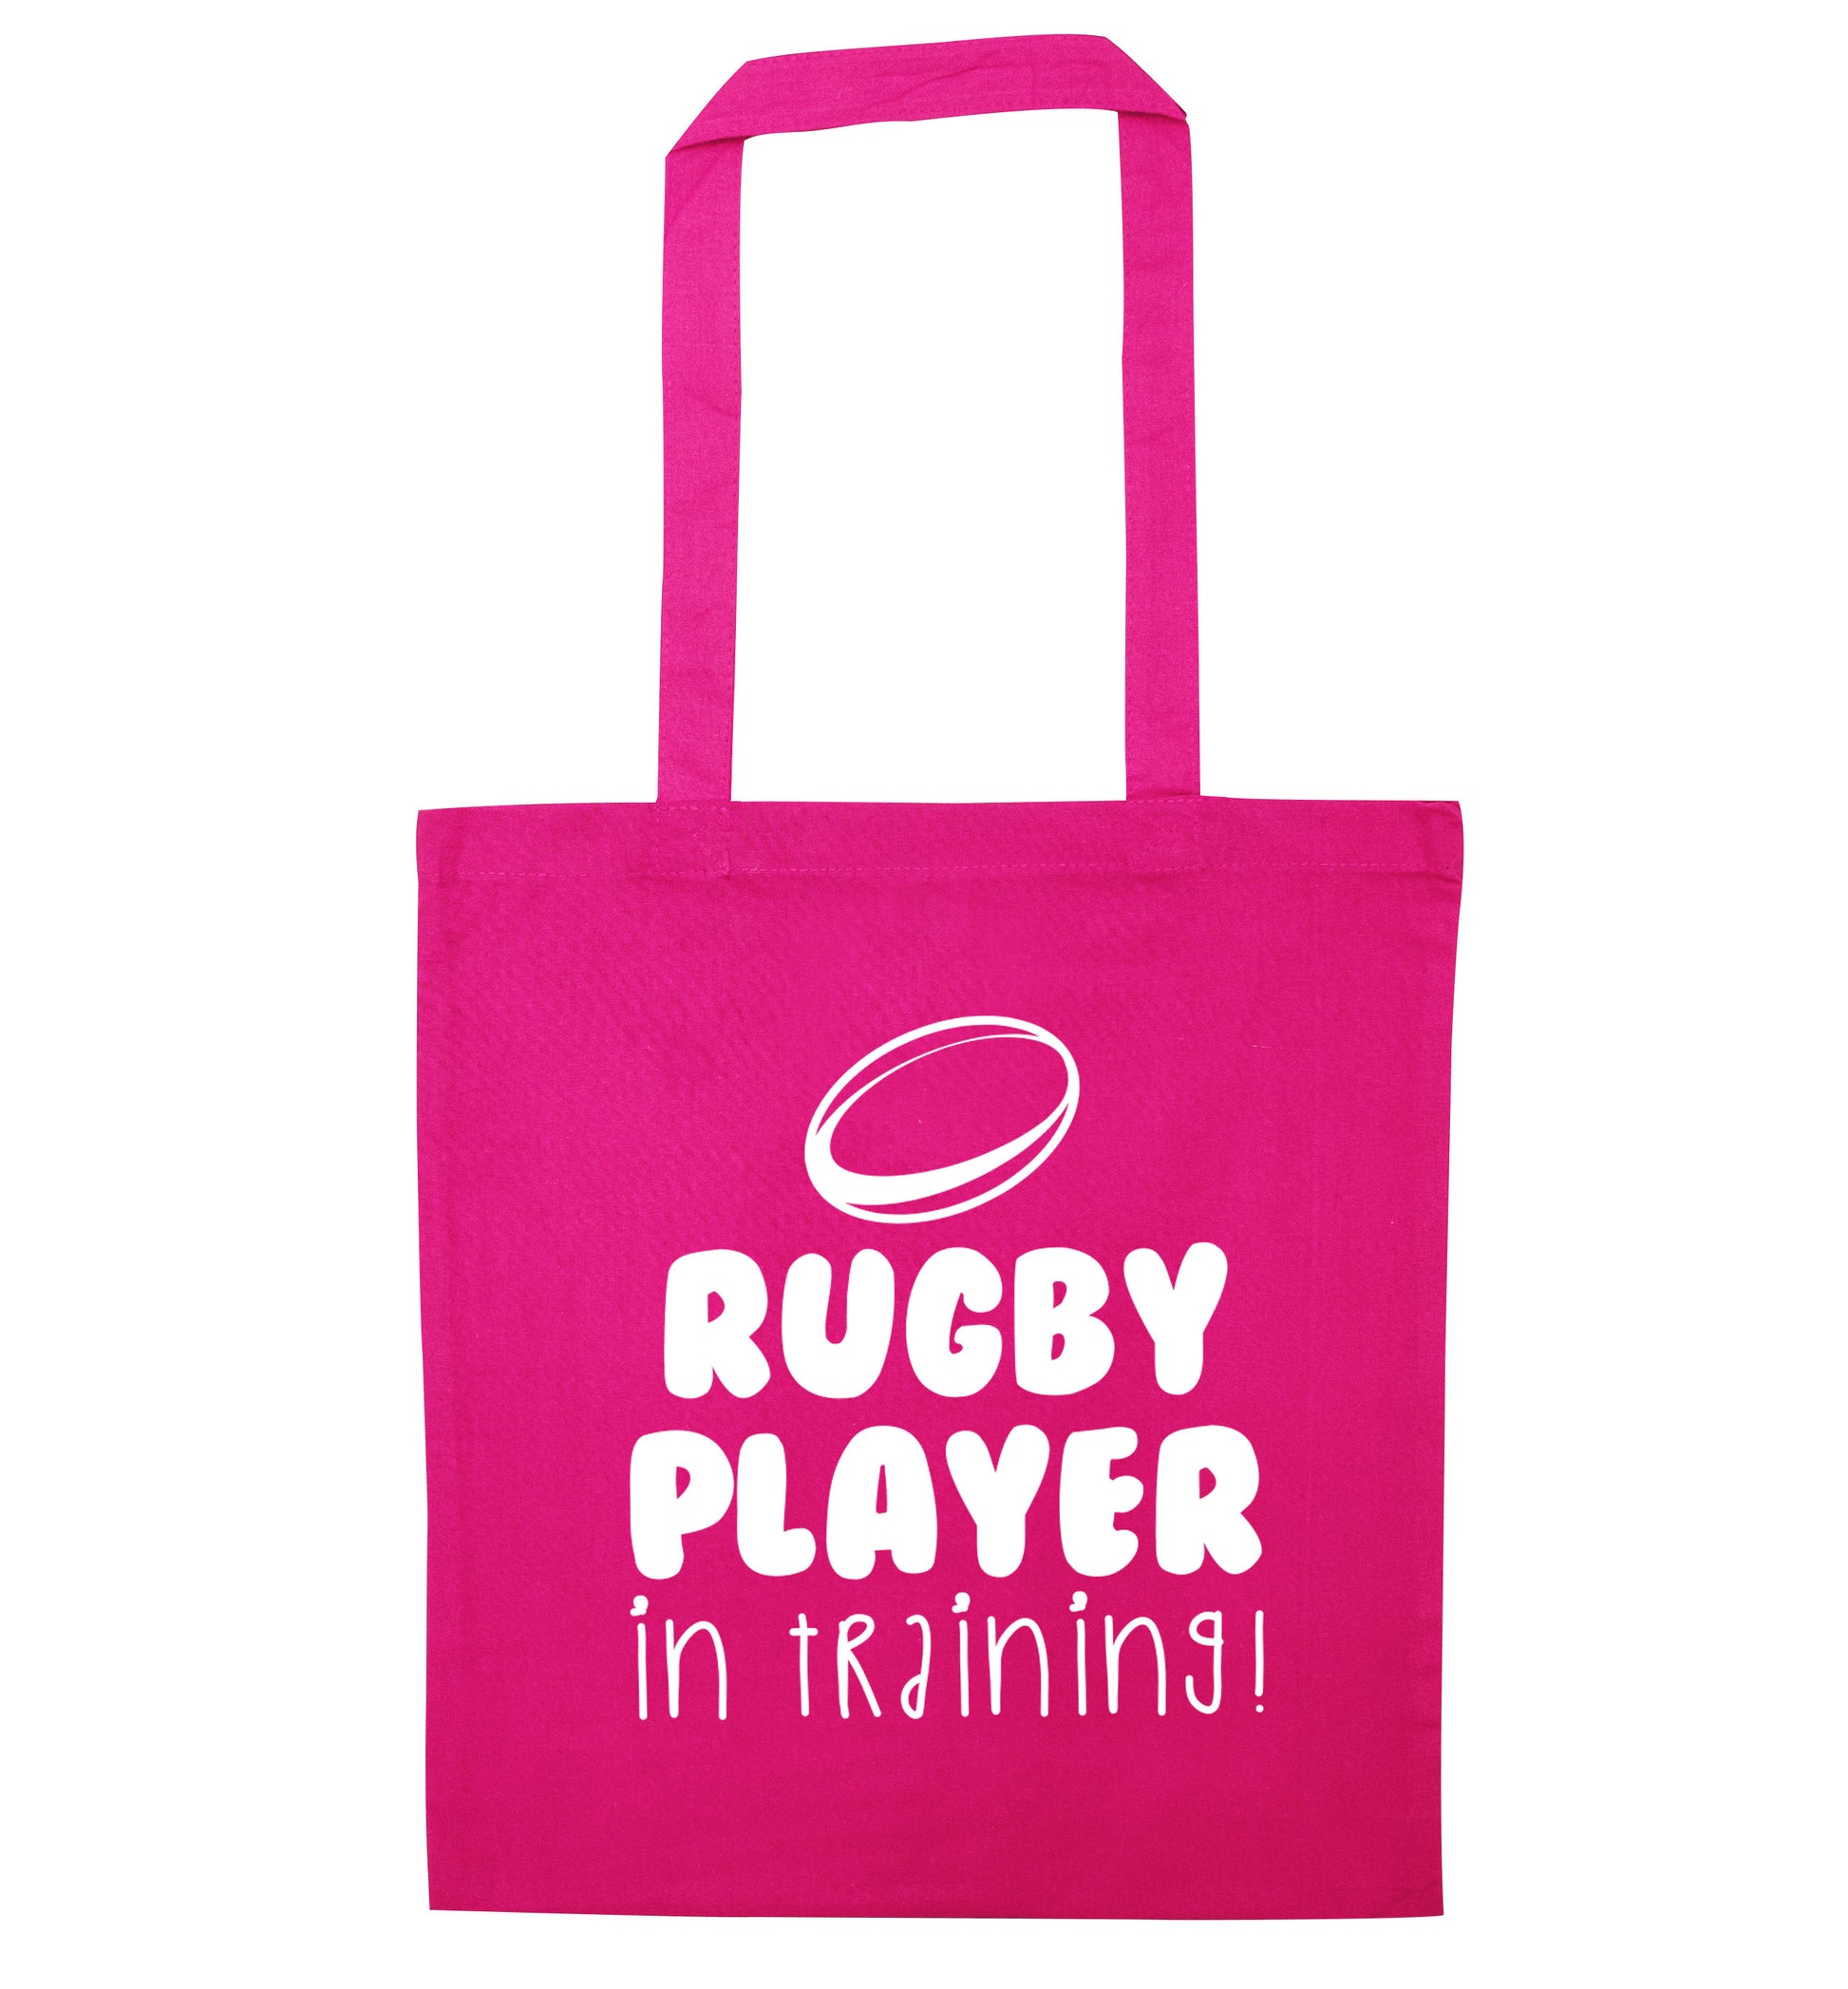 Rugby player in training pink tote bag